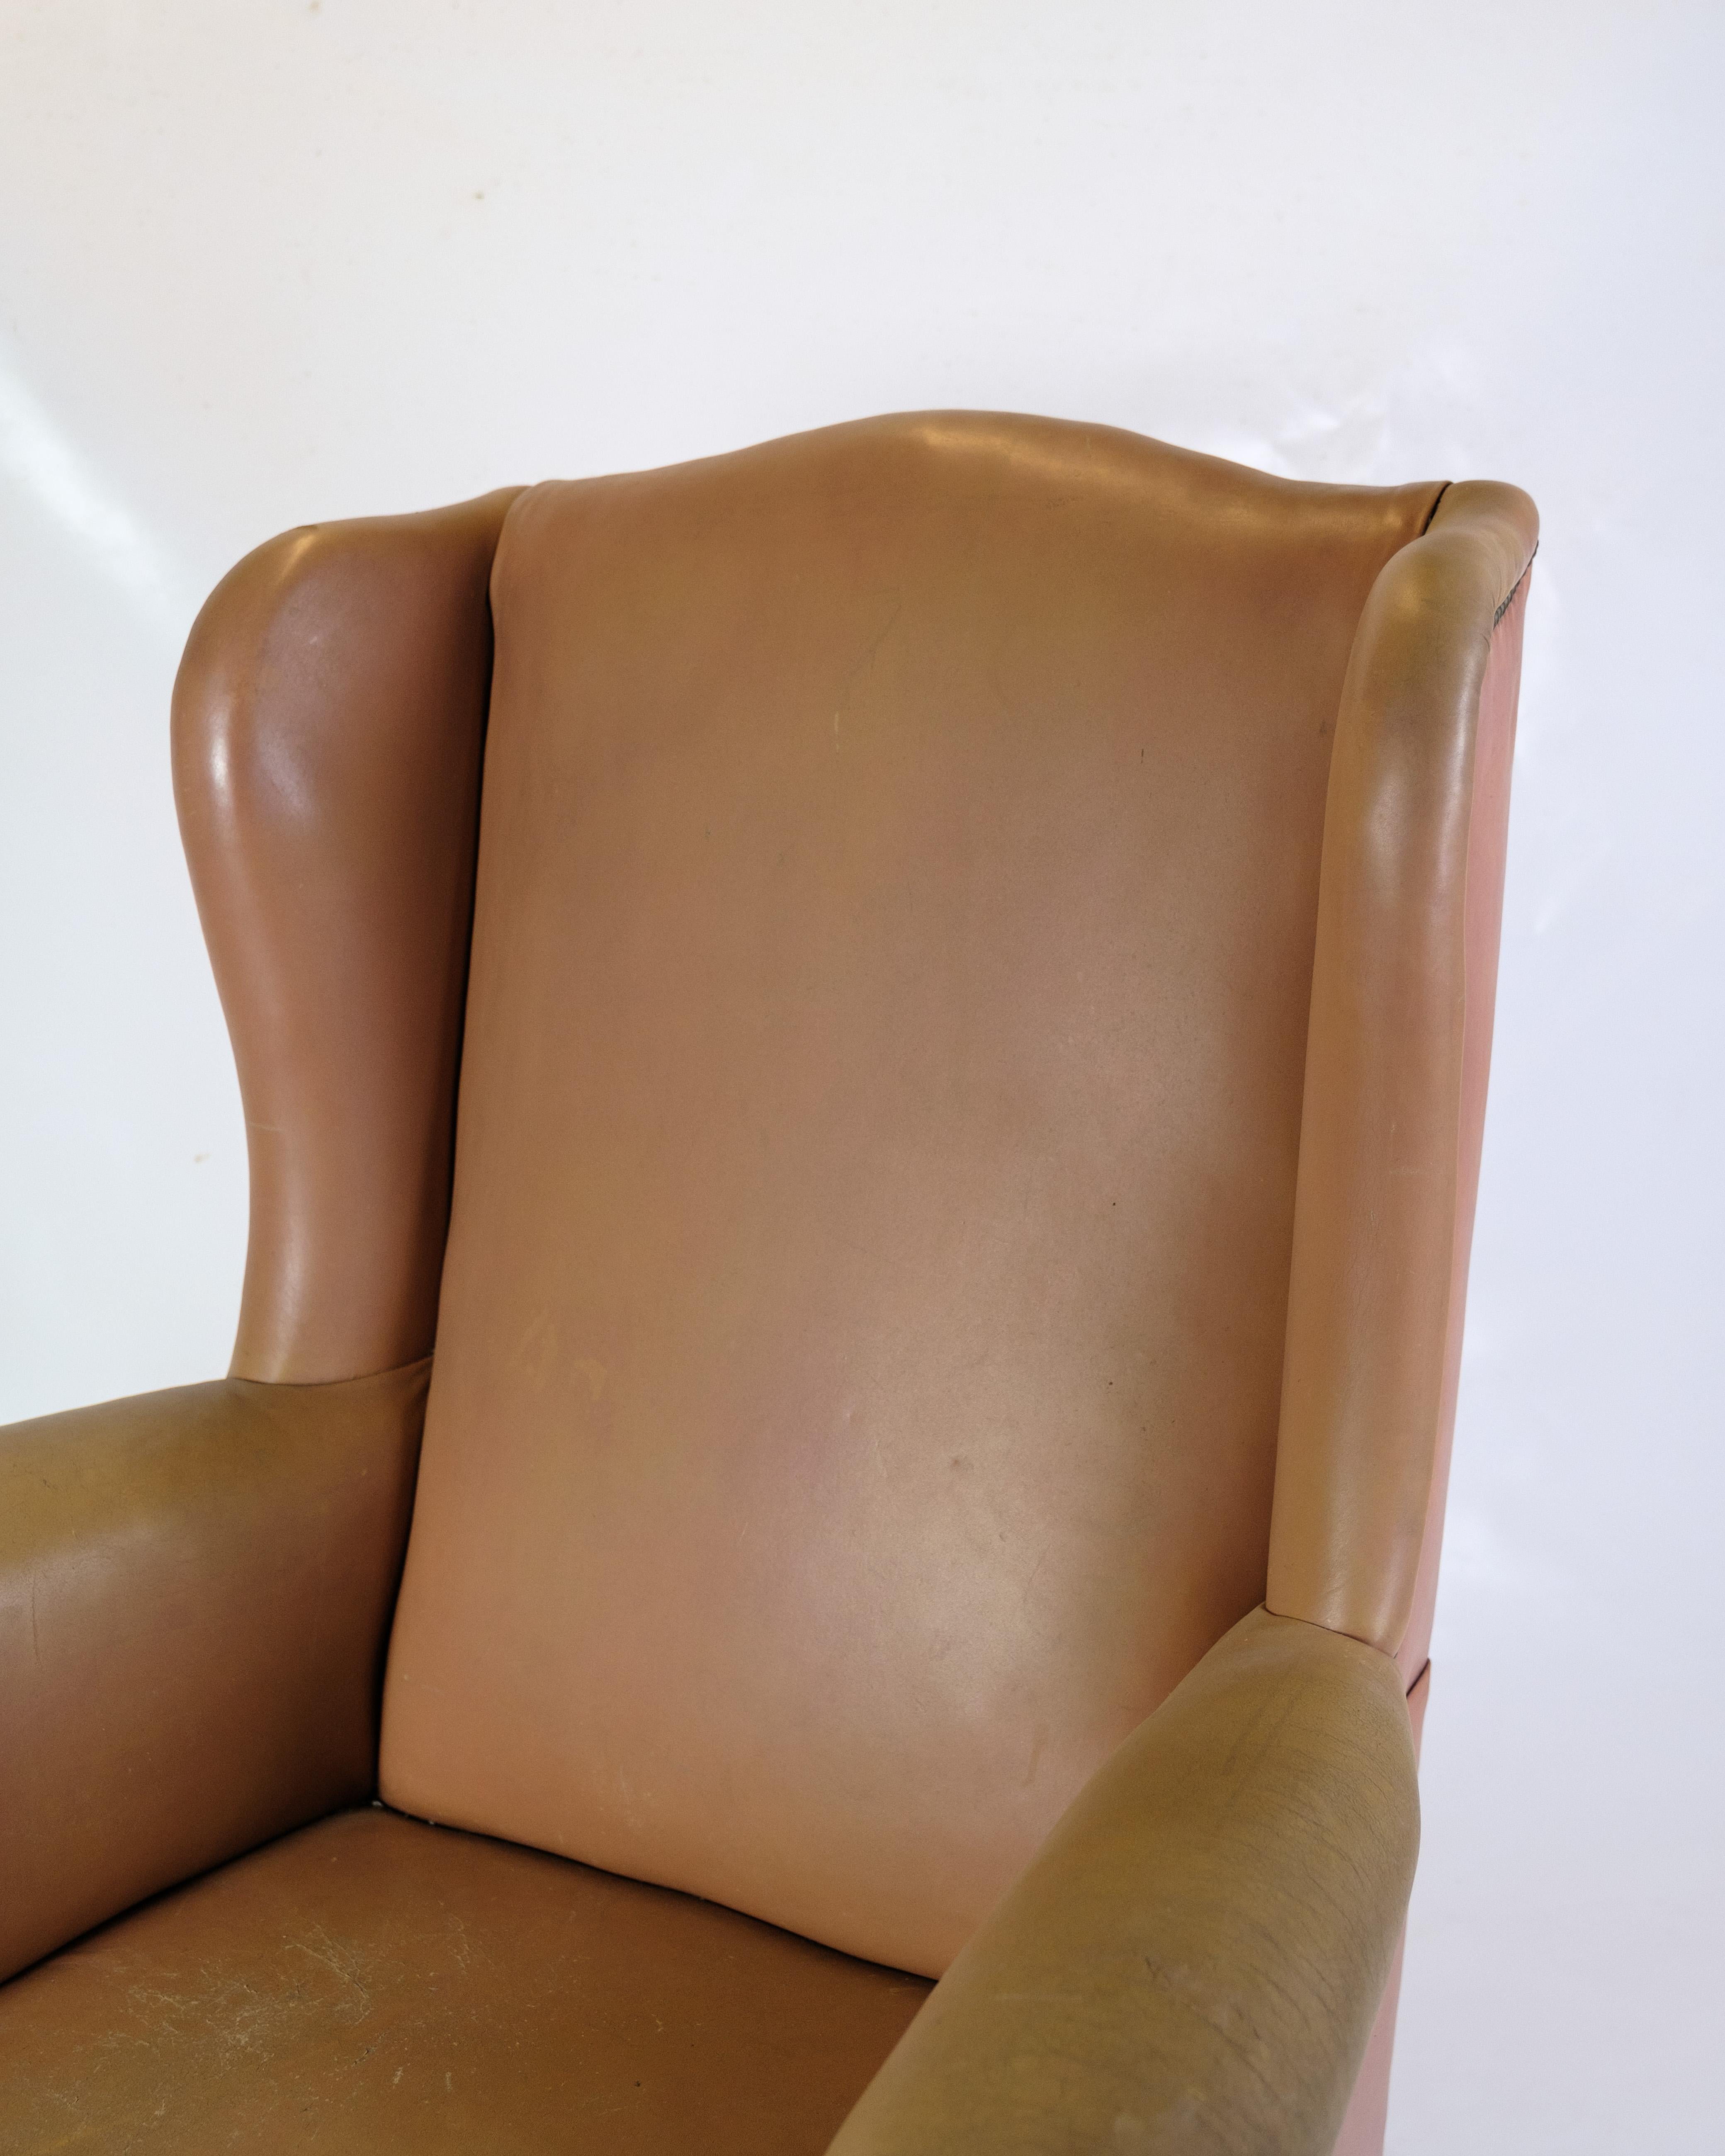 Antique High Flap Chair, Chesterfield Style Made In Brown Leather From 1920s For Sale 6